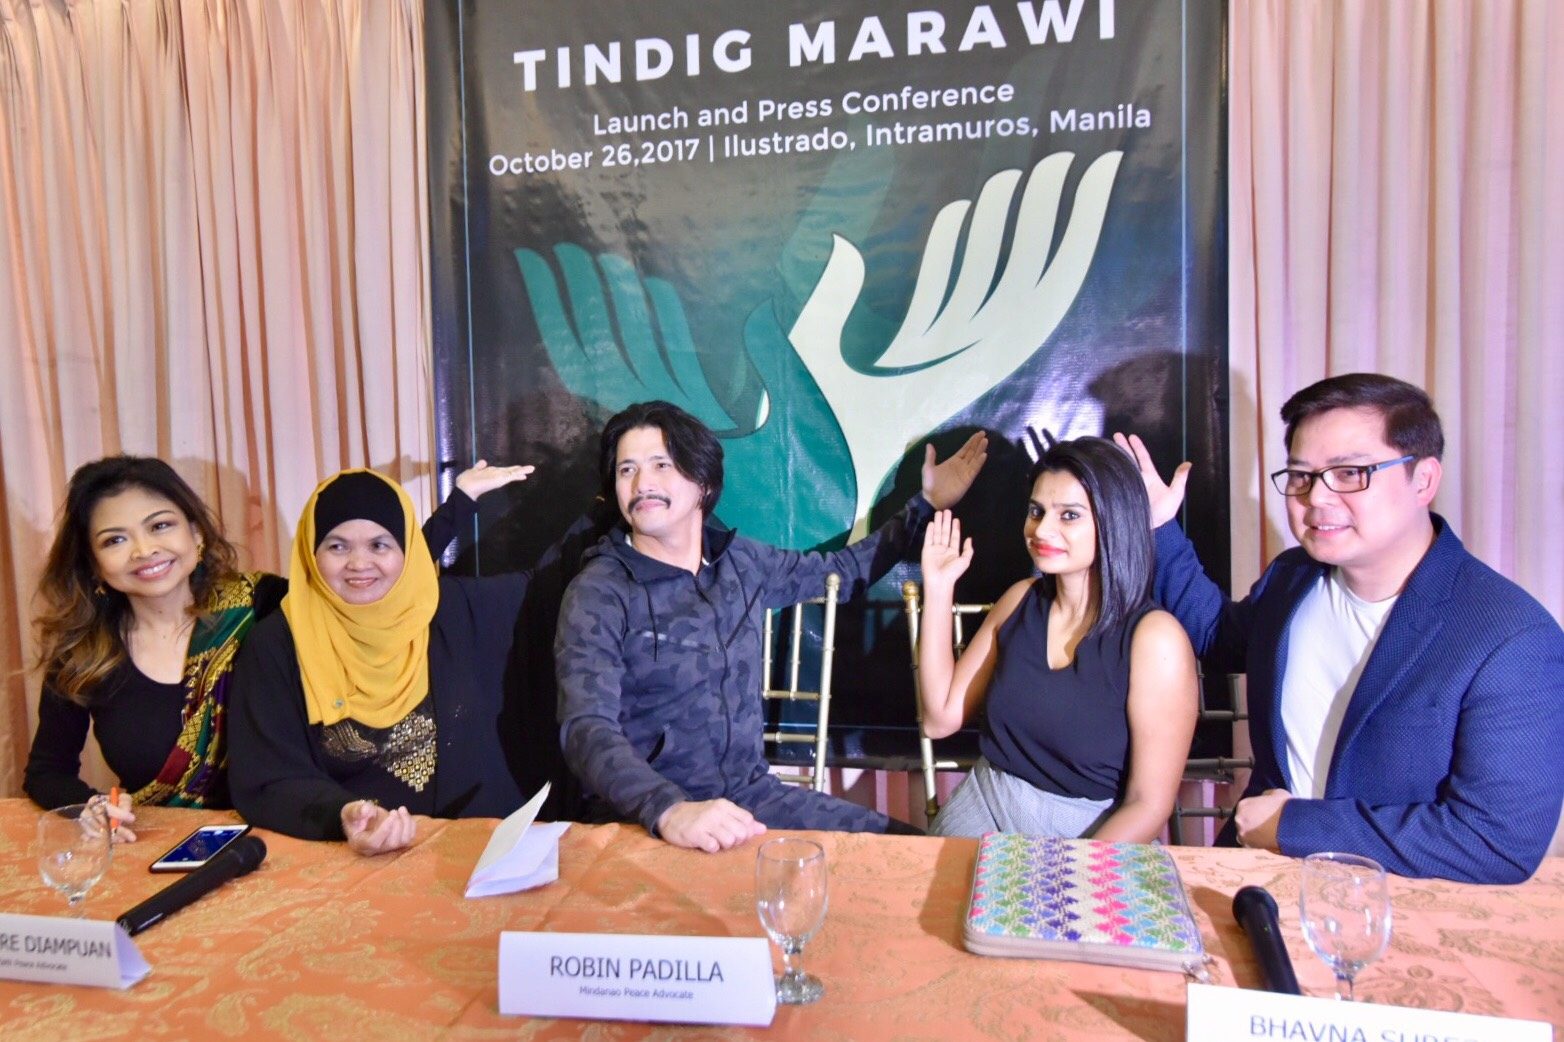 Robin Padilla leads civic movement for Marawi recovery: ‘The battle has just begun’